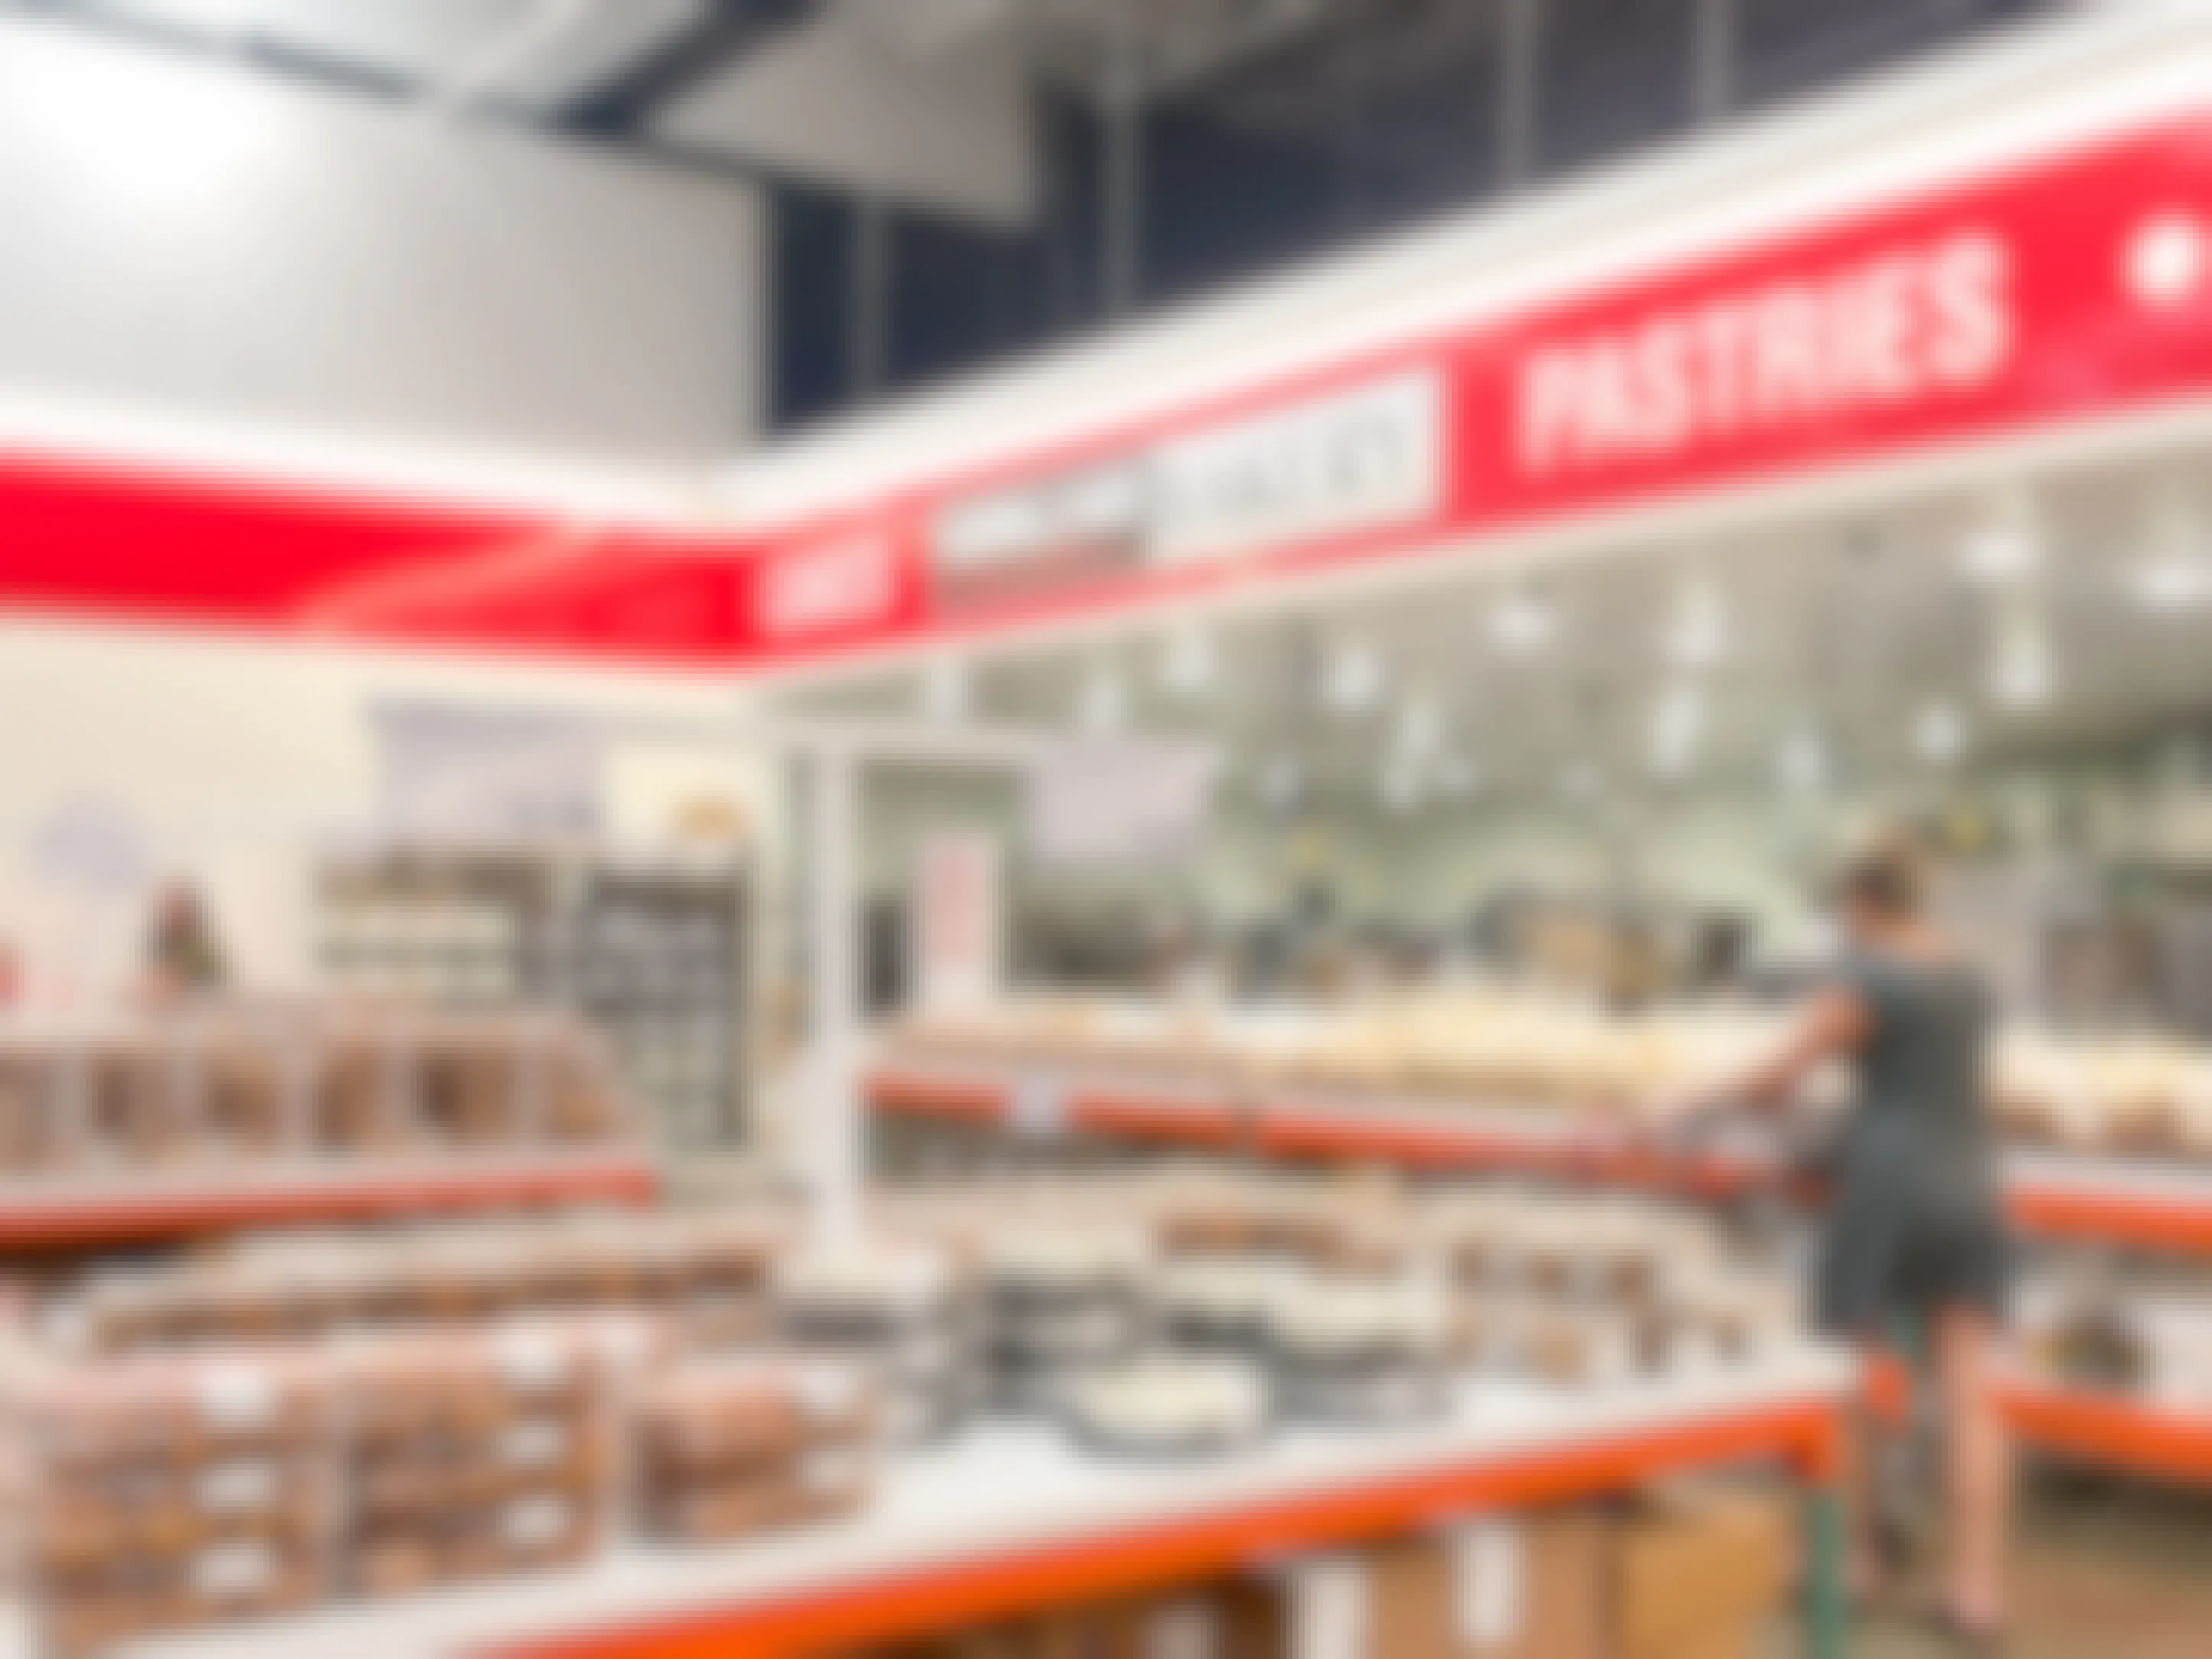 12 Costco Bakery Secrets That You Need to Know (Like How To Find the Costco Cake Order Form)